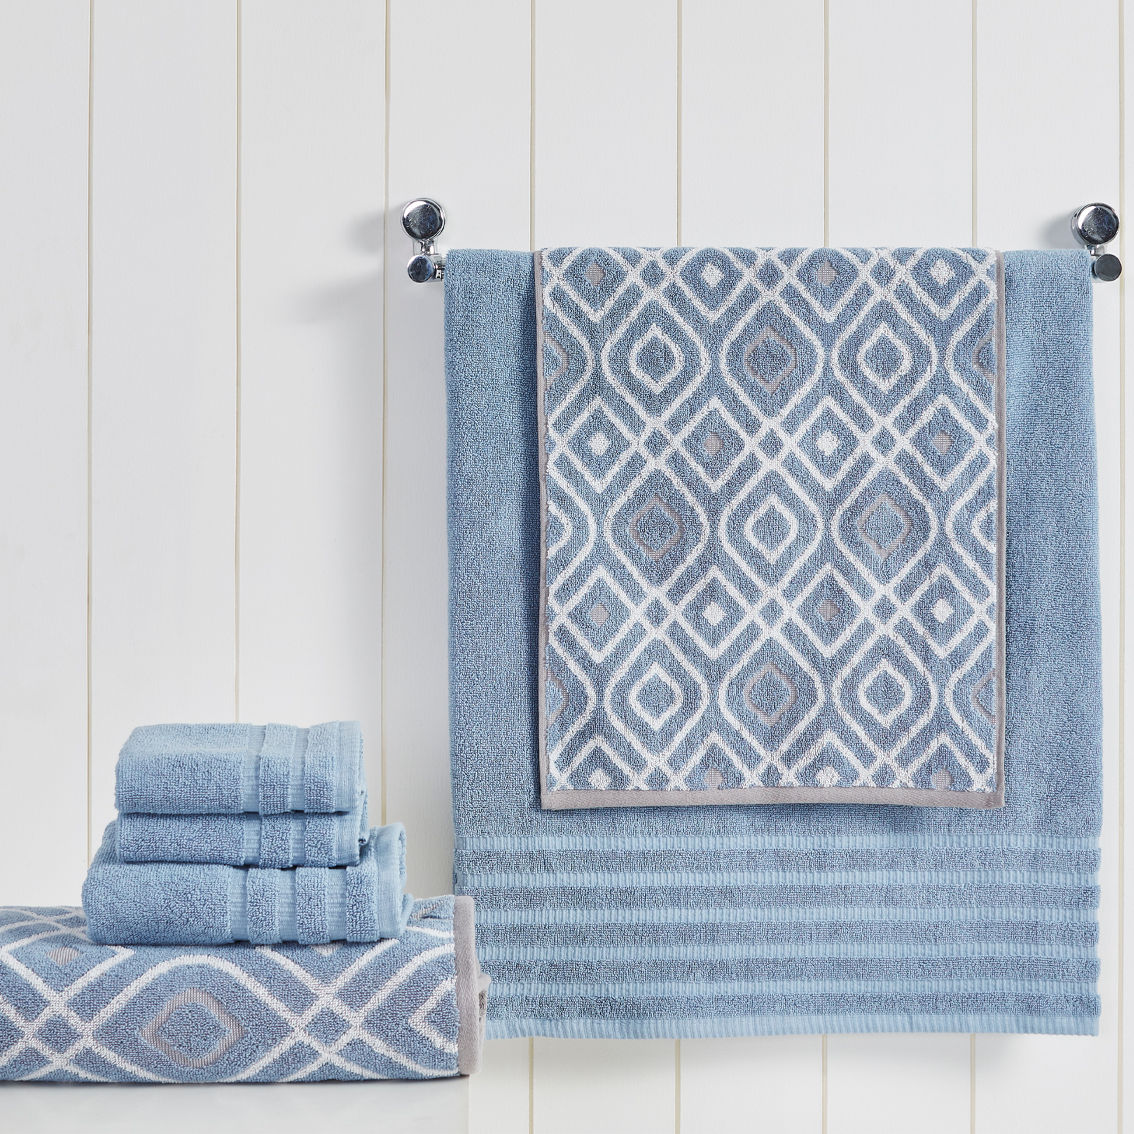 Pacific Coast Textiles 6 Pc. Yarn Dyed Oxford Towel Set - Image 2 of 2